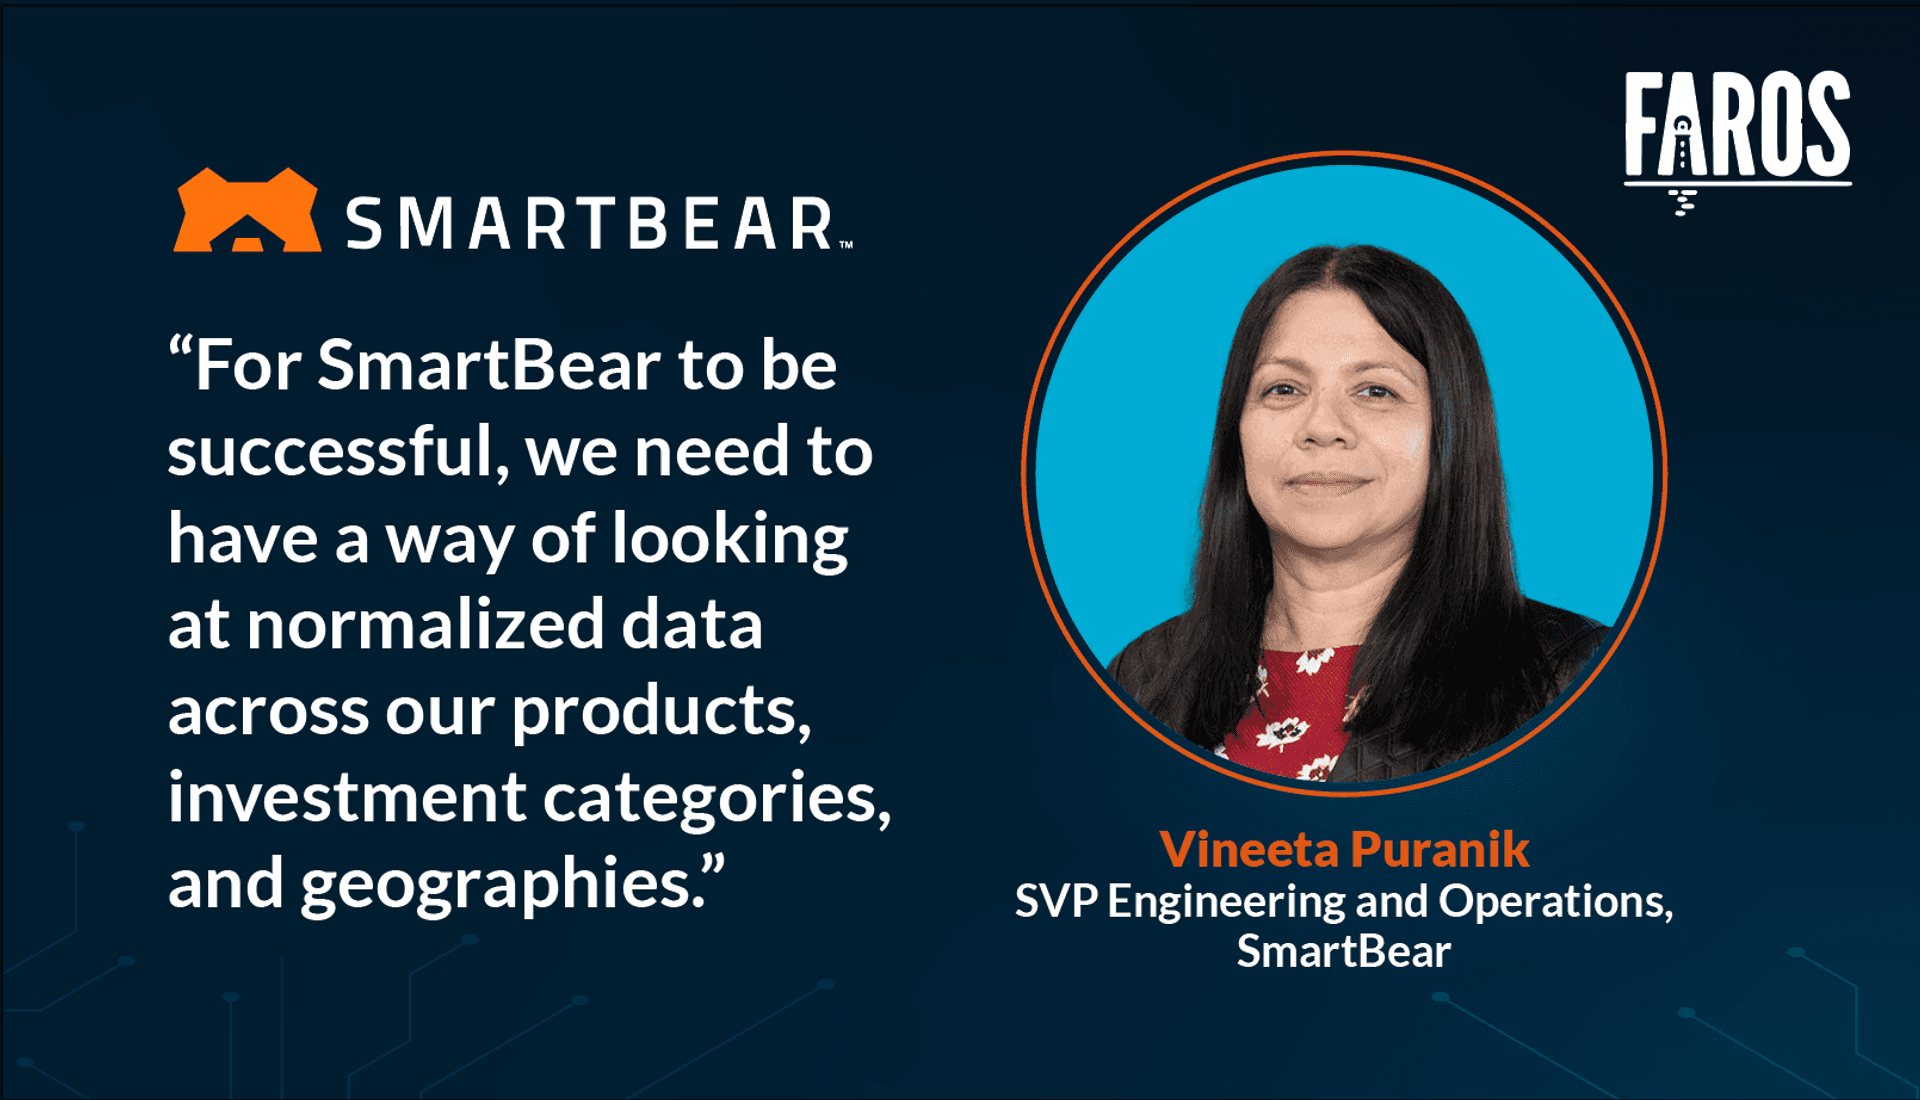 A quote by Vineeta Prunik, SVP of Engineering and Operations at SmartBear who says "For SmartBear to be successful, we need to have a way of looking at normalized data across our products, investment categories, and geographies."